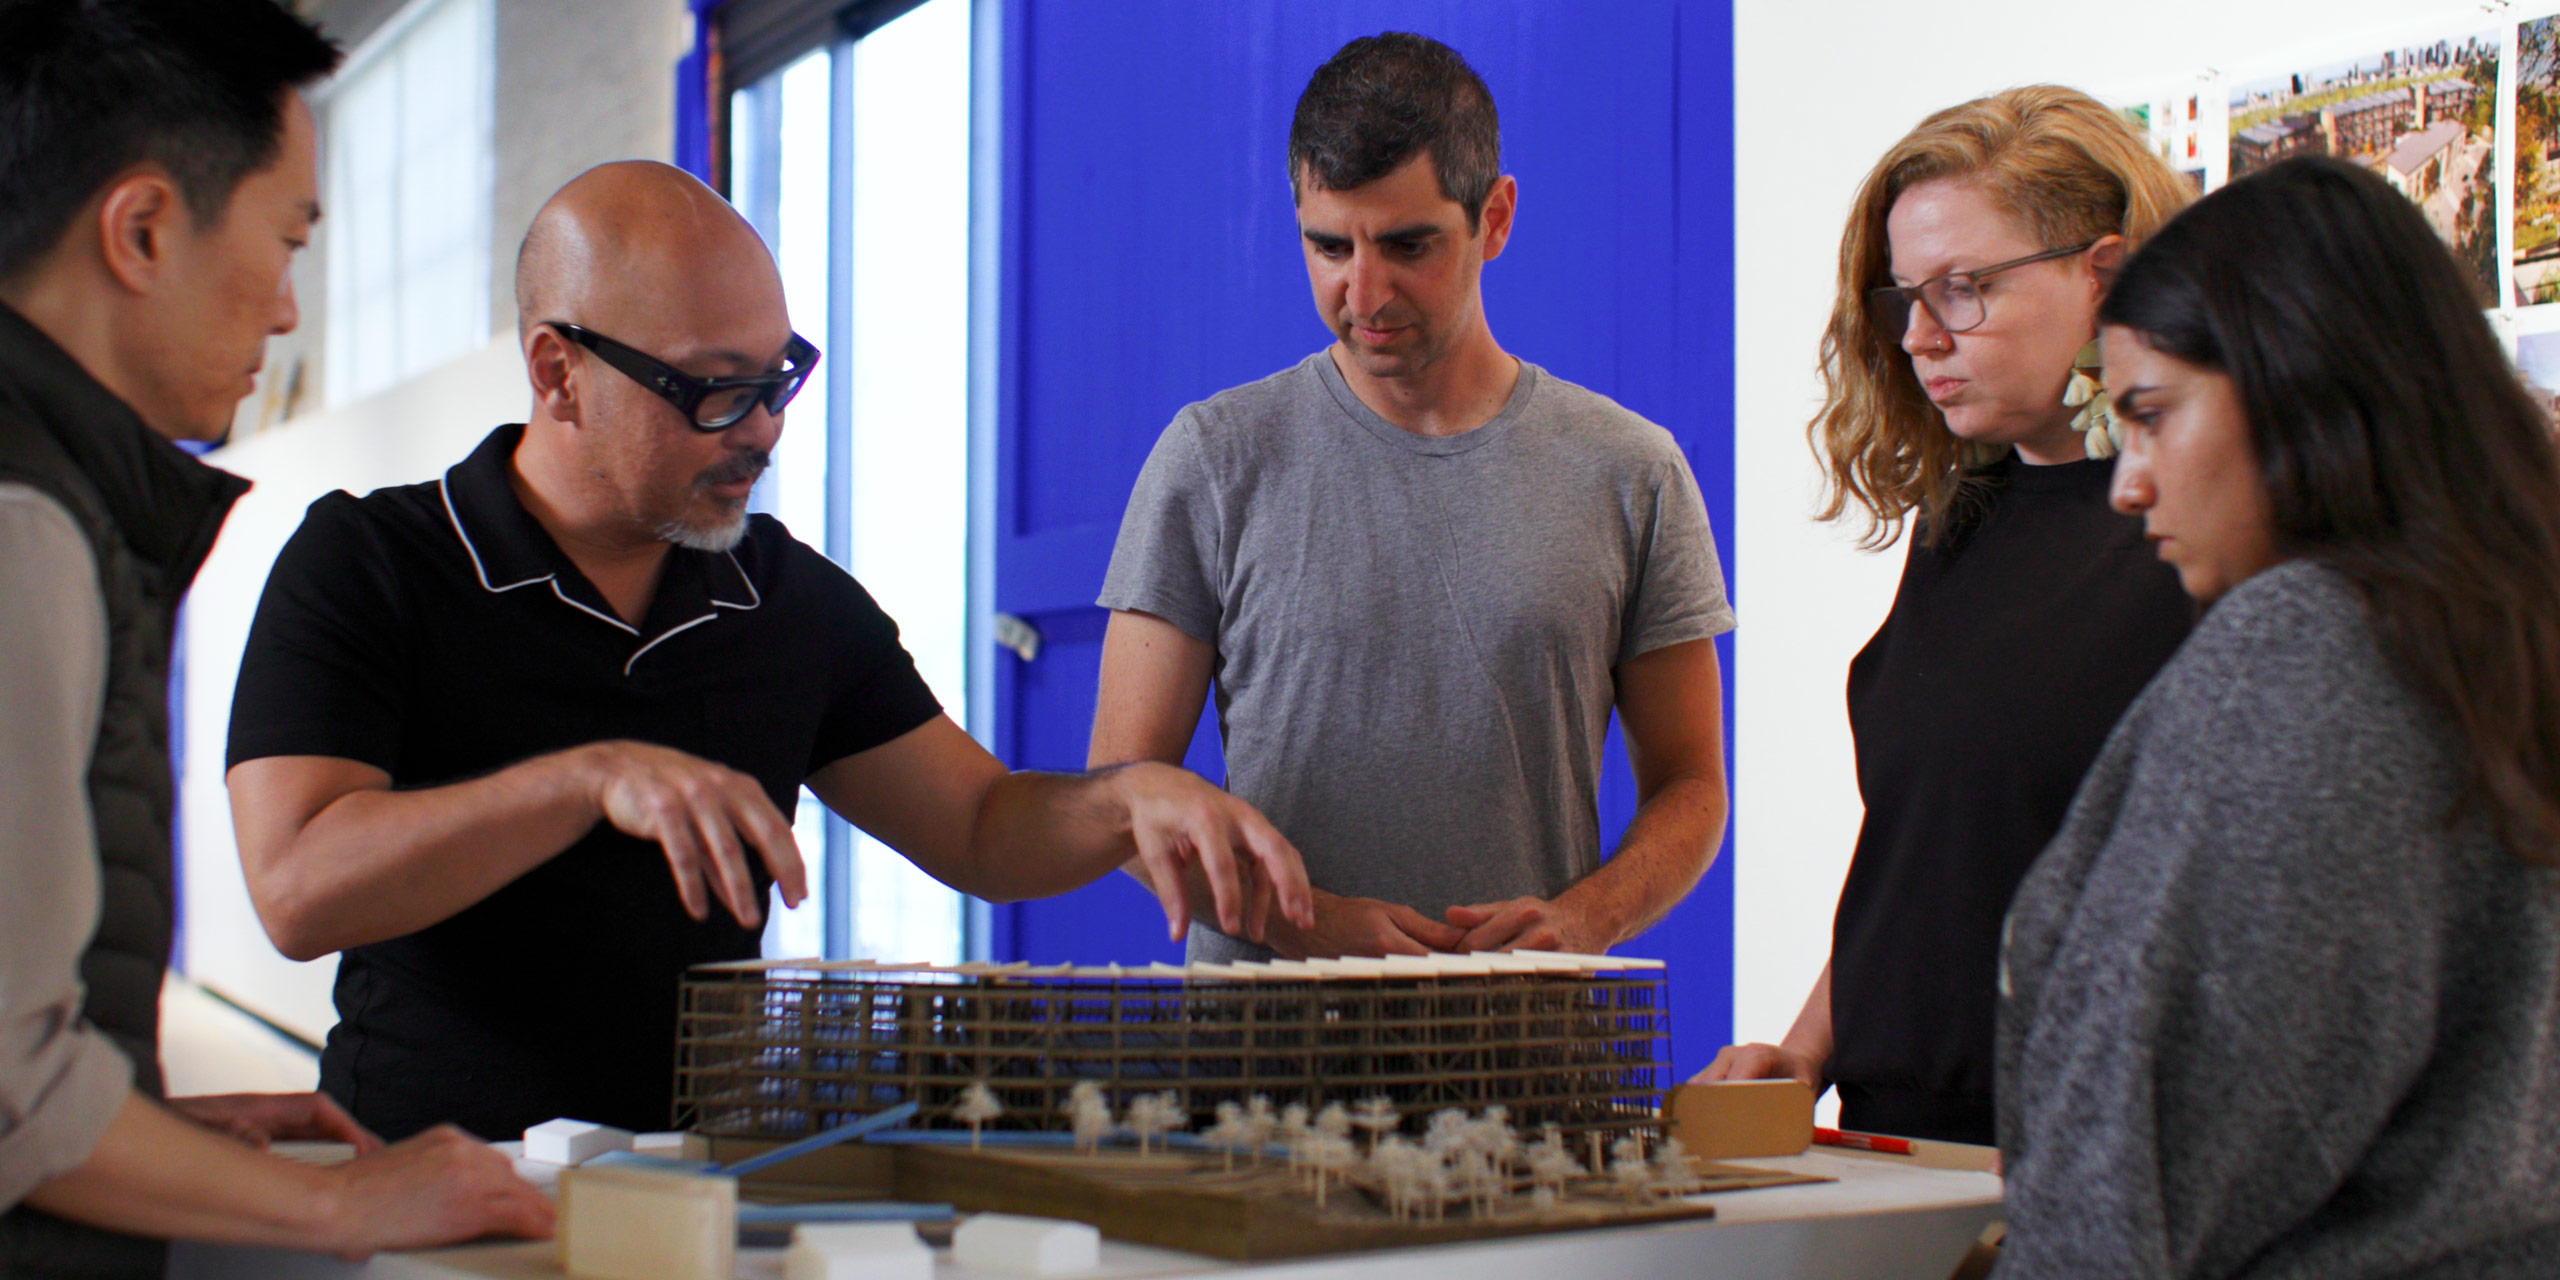 Five team members collaborating around an architectural model